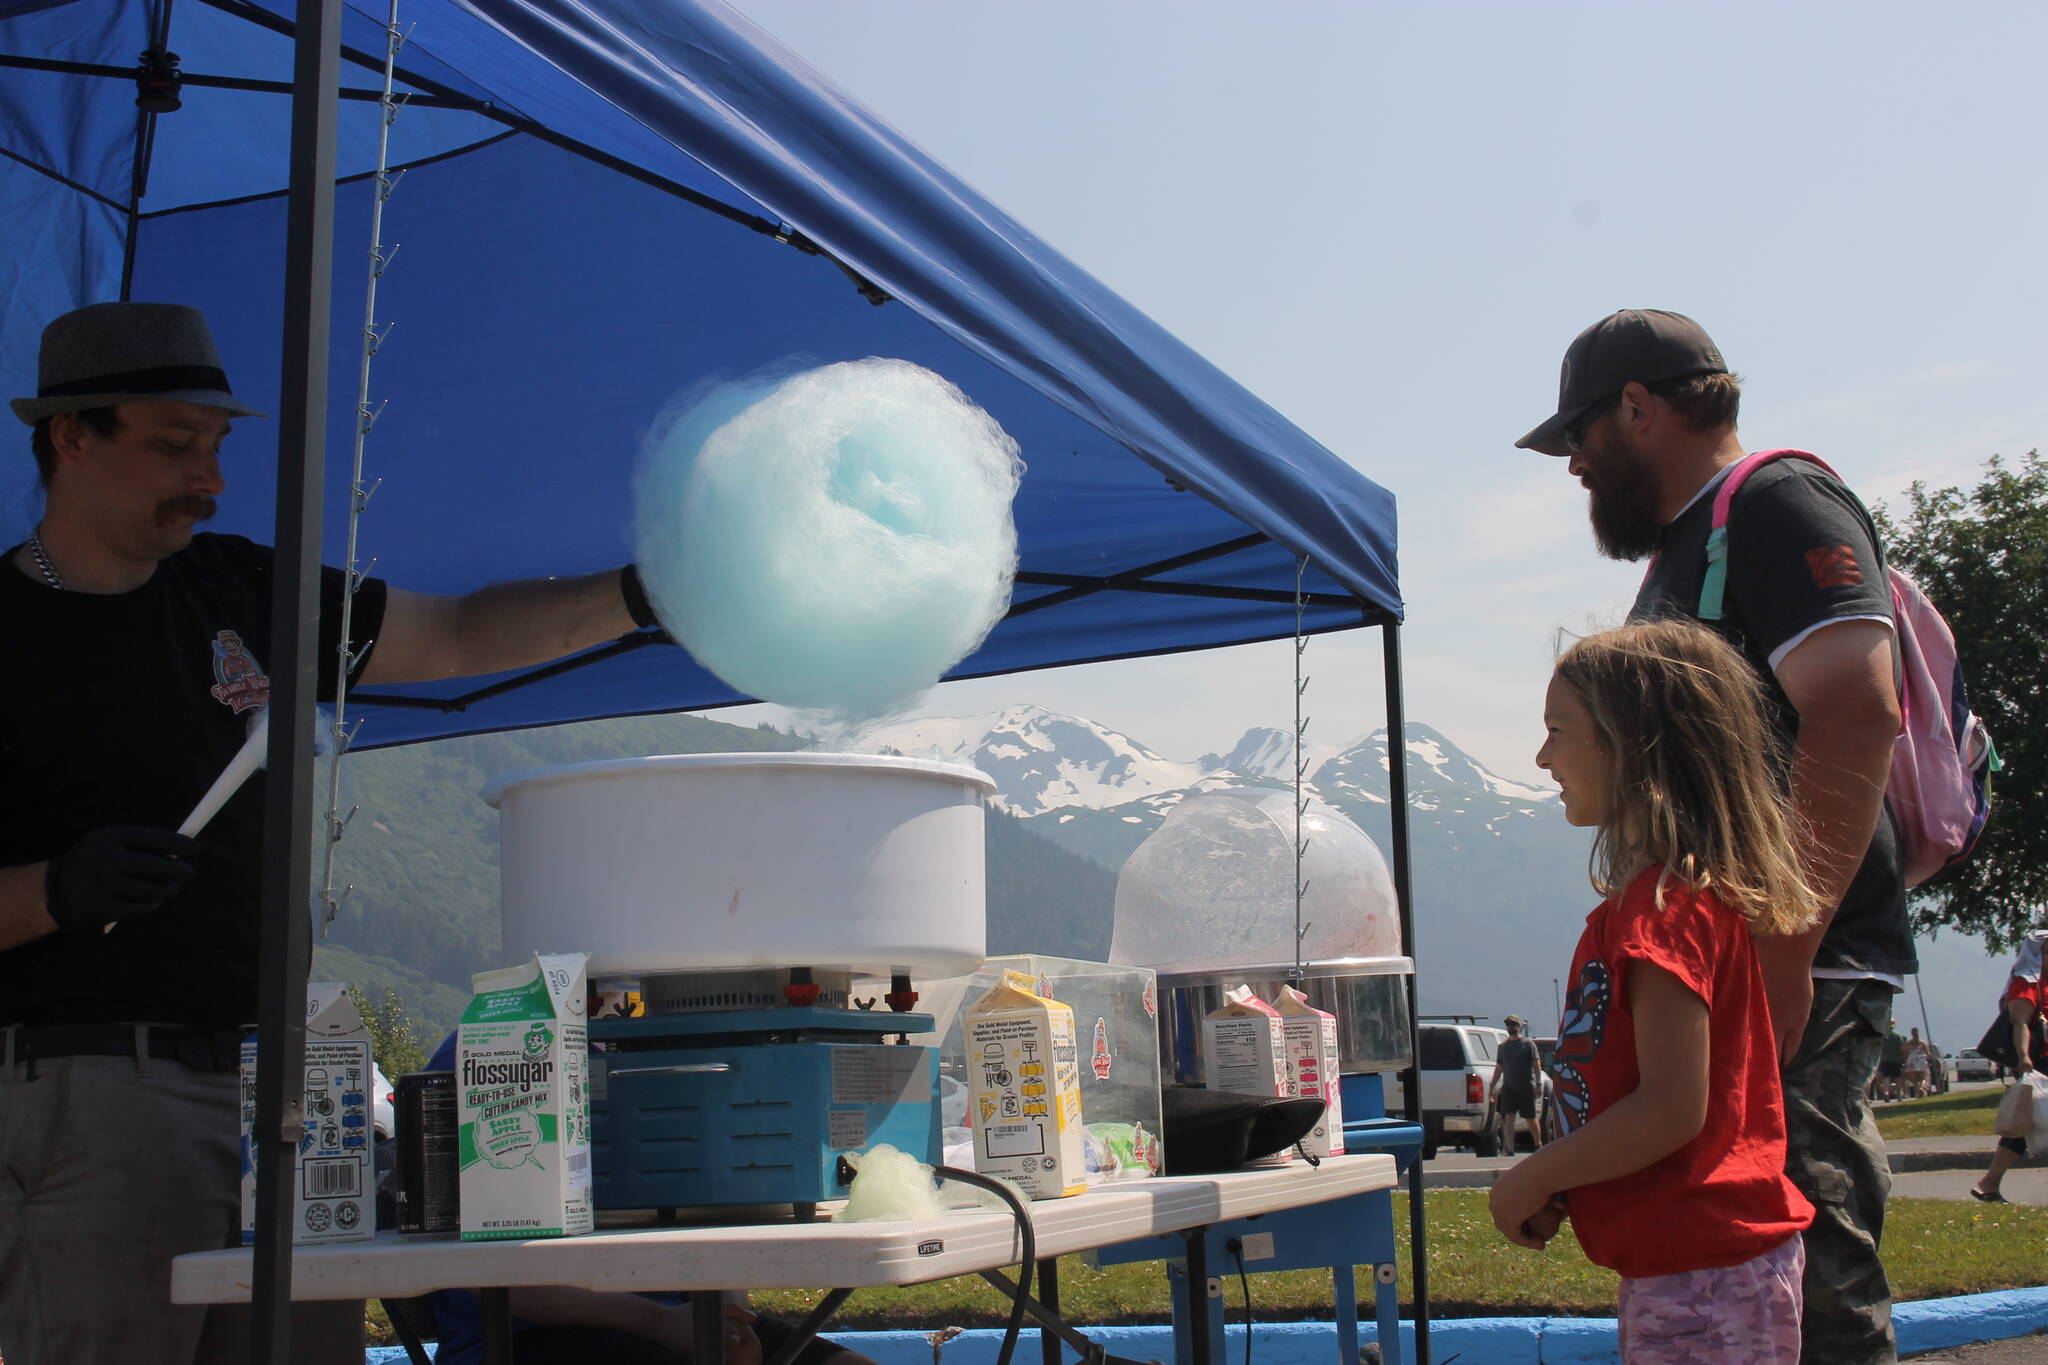 Mia Halloway, 6, grabs a cotton candy with her dad in Savikko Park. A long string of kids stood in line to grab a cotton candy from the Twhrly Whrliy Cotton Candy stand on a bright and sunny Fourth of July afternoon. (Clarise Larson / Juneau Empire)